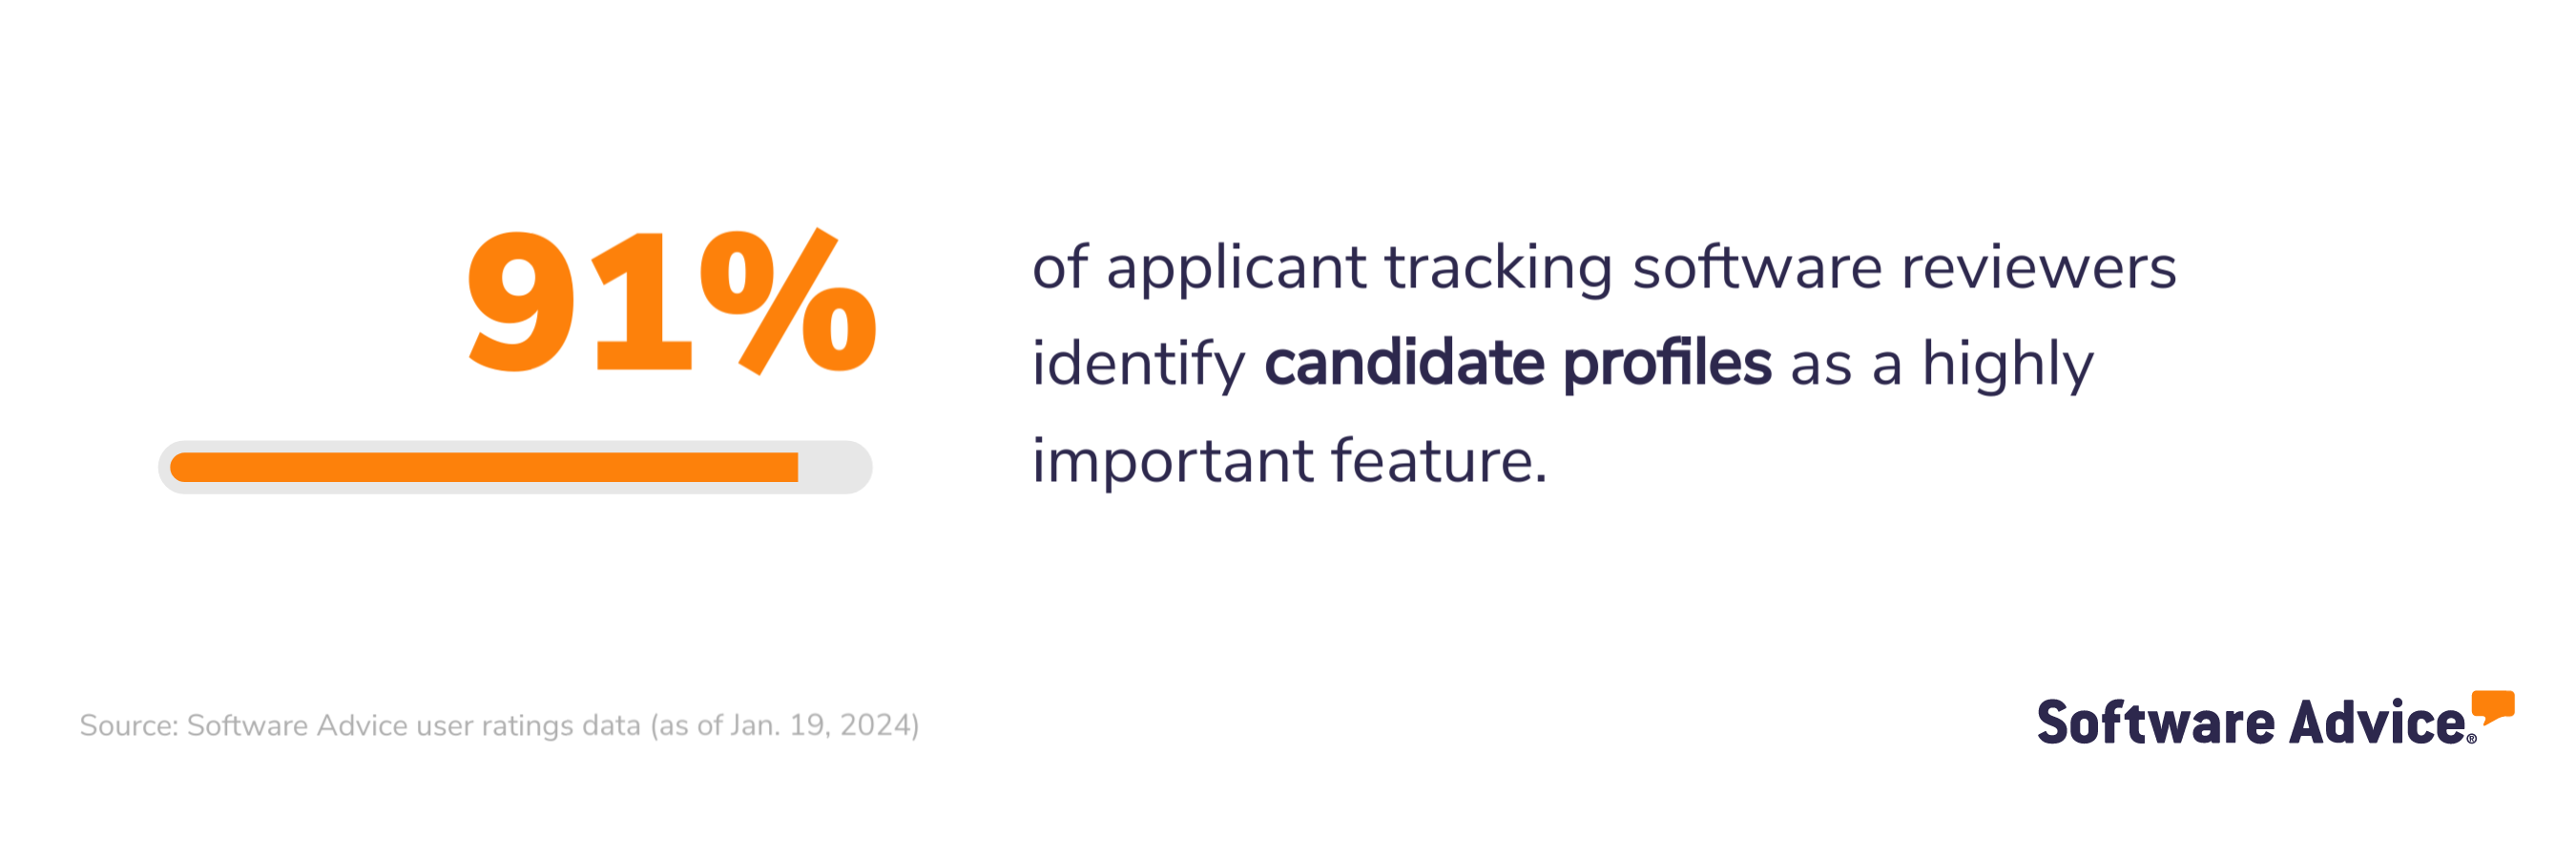 91% of applicant tracking software reviewers identify candidate profiles as a highly important feature.